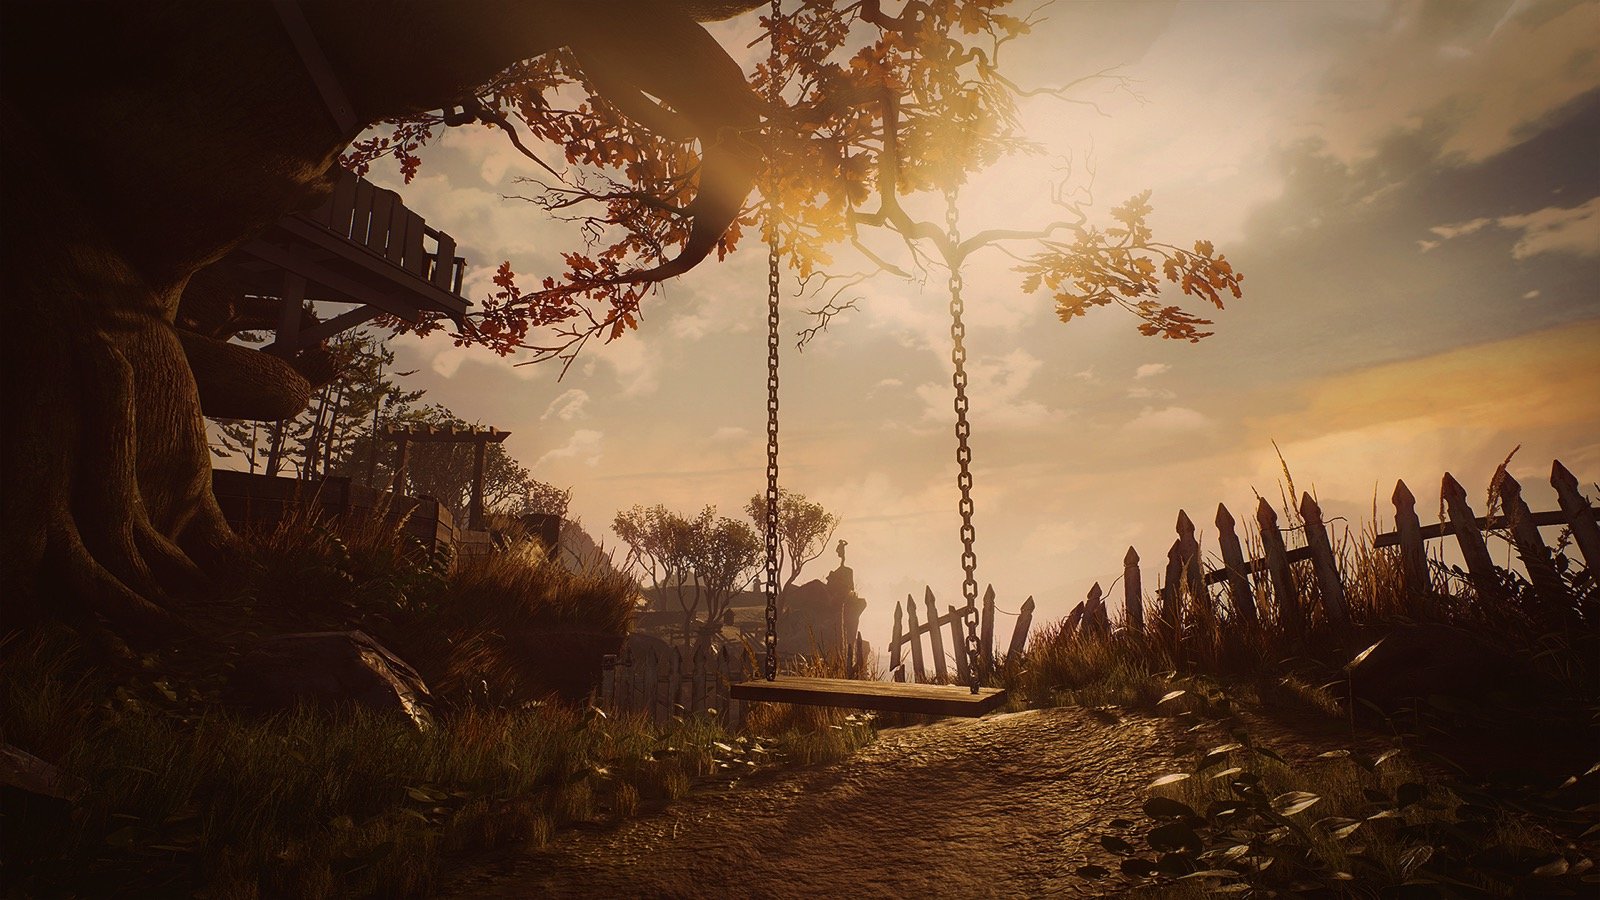 The 'What Remains of Edith Finch is free on PS Plus so I finally played it' Review